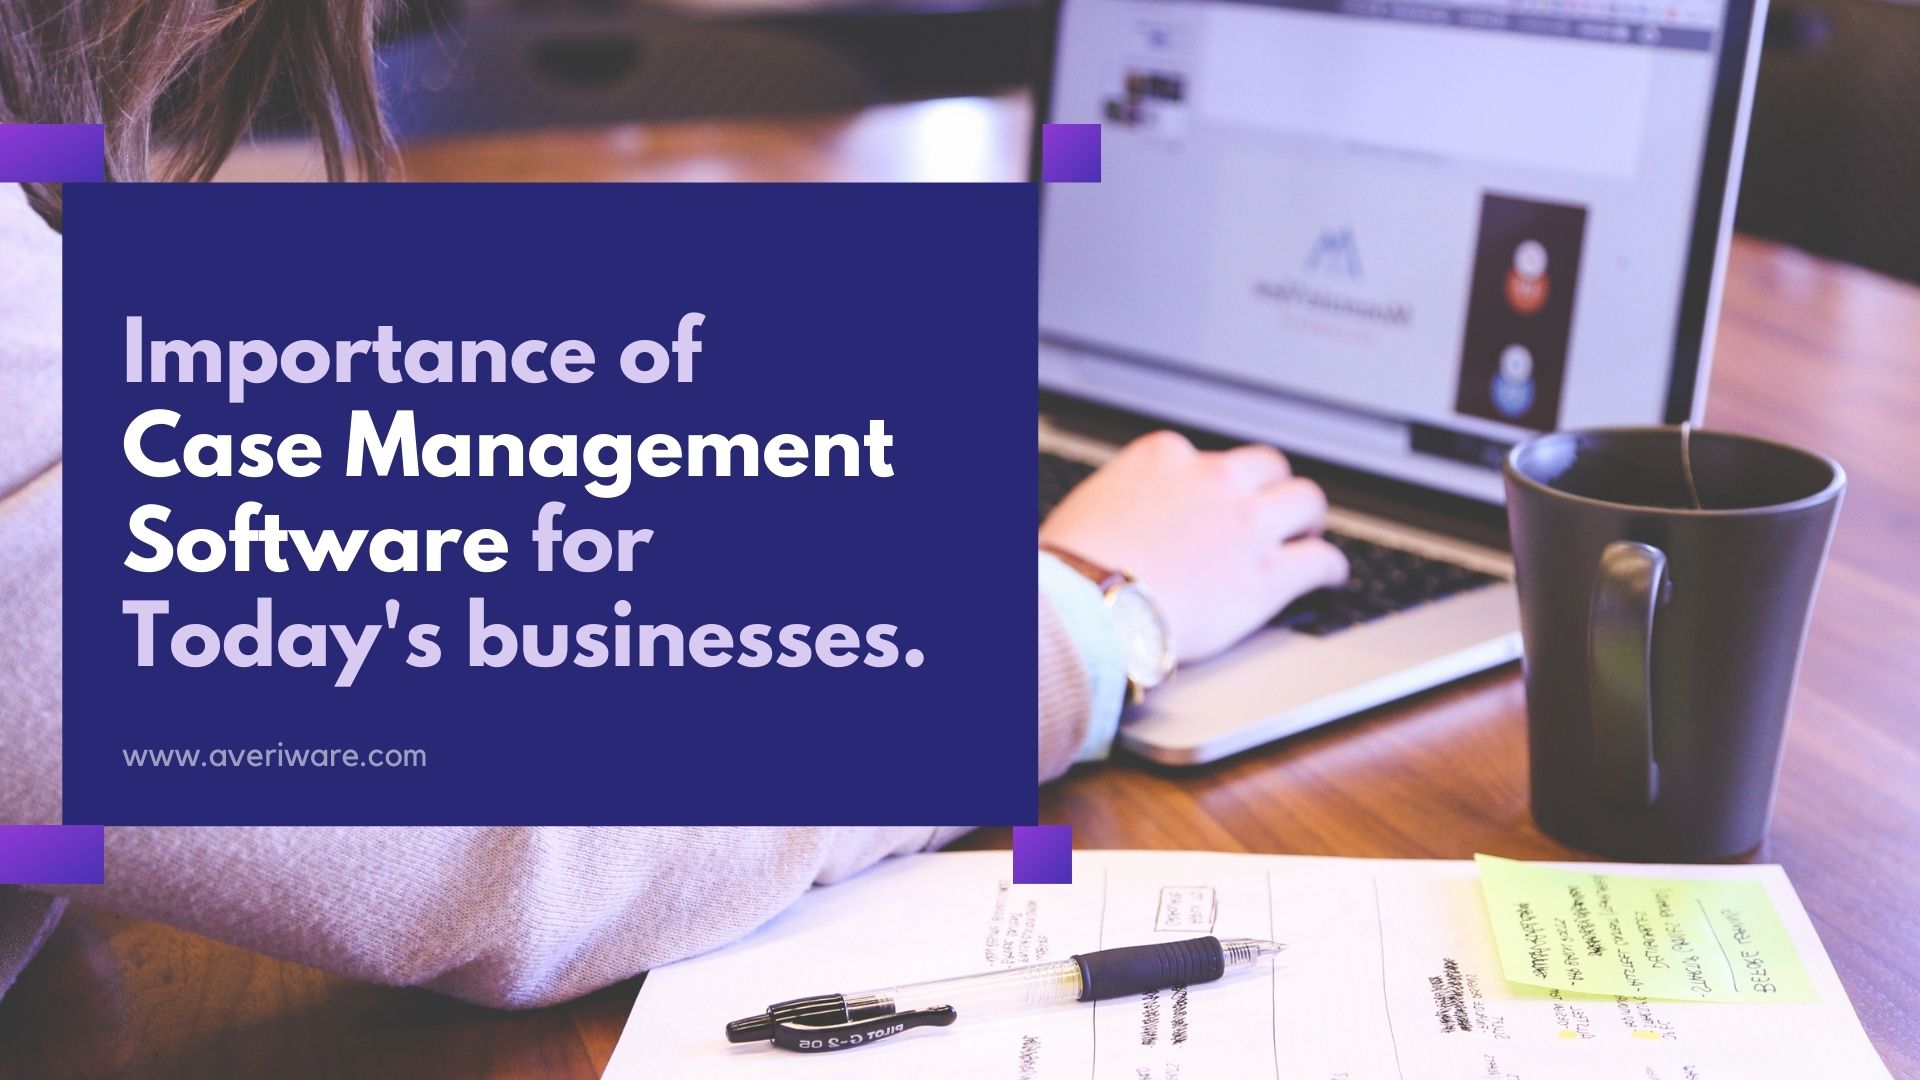 Importance of Case Management Software for Today's businesses.